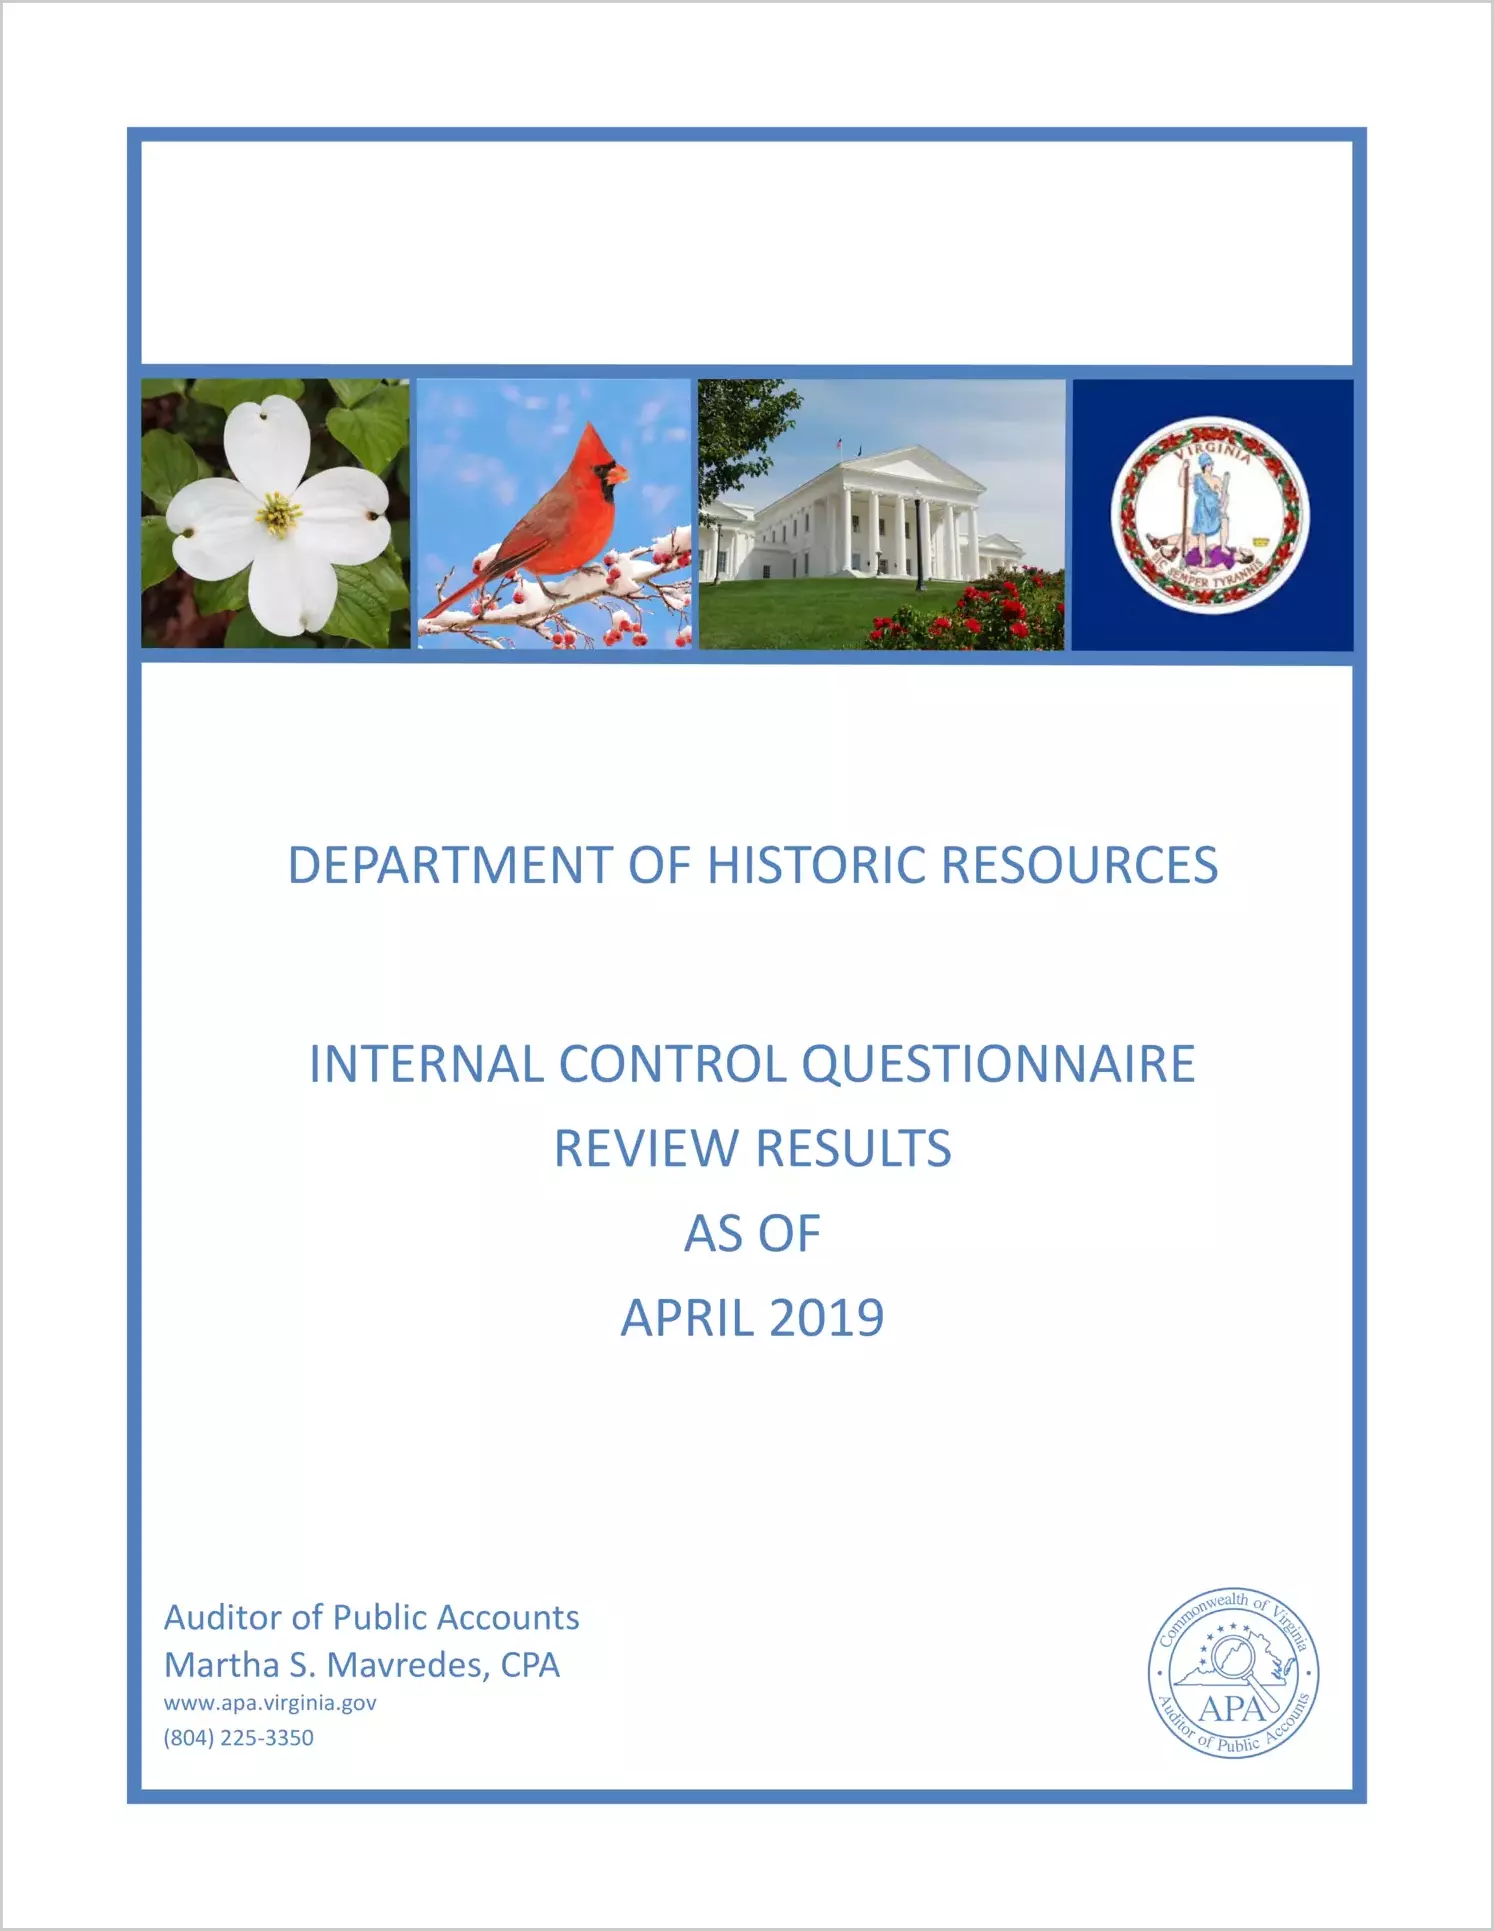 Department of Historic Resources Internal Control Questionnaire Review Results as of April 2019